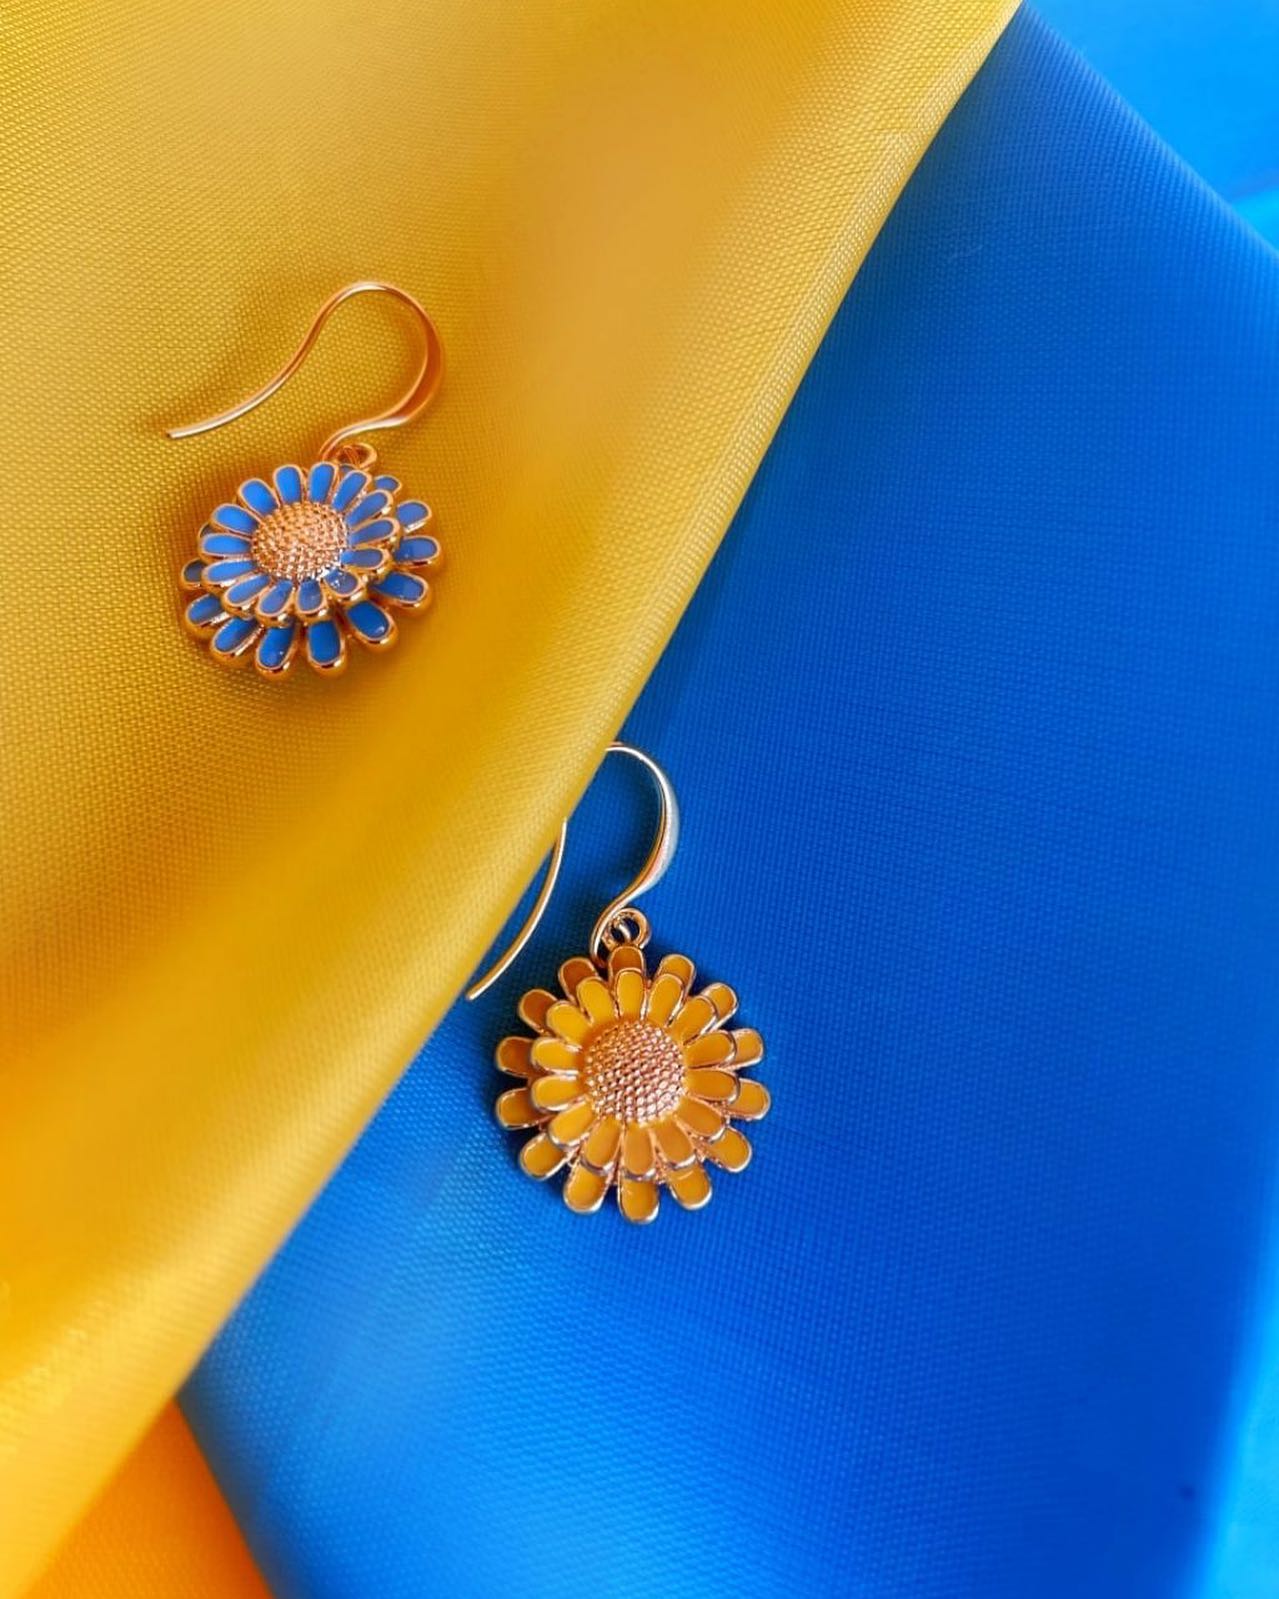 Beautiful and original handmade earrings in blue and yellow colors for those who love bright colorings. Be original 😉💙💛. 
#handmadeearrings #blueearrings #yellowearrings #supportukraine🇺🇦 #supportukraine #handmadebyukrainian #ukrainianartist #jewellery #українське #ukrainesupport #buytosupport #aerrings #talentedpeople #supportsmallbusiness #madewithlove #creativesunday #yellow #inspiration #beautifulhandmadejewelry #handmadejewelry 

Follow: 
@handcrafts.ch 
@handcrafts.ch 
@handcrafts.ch